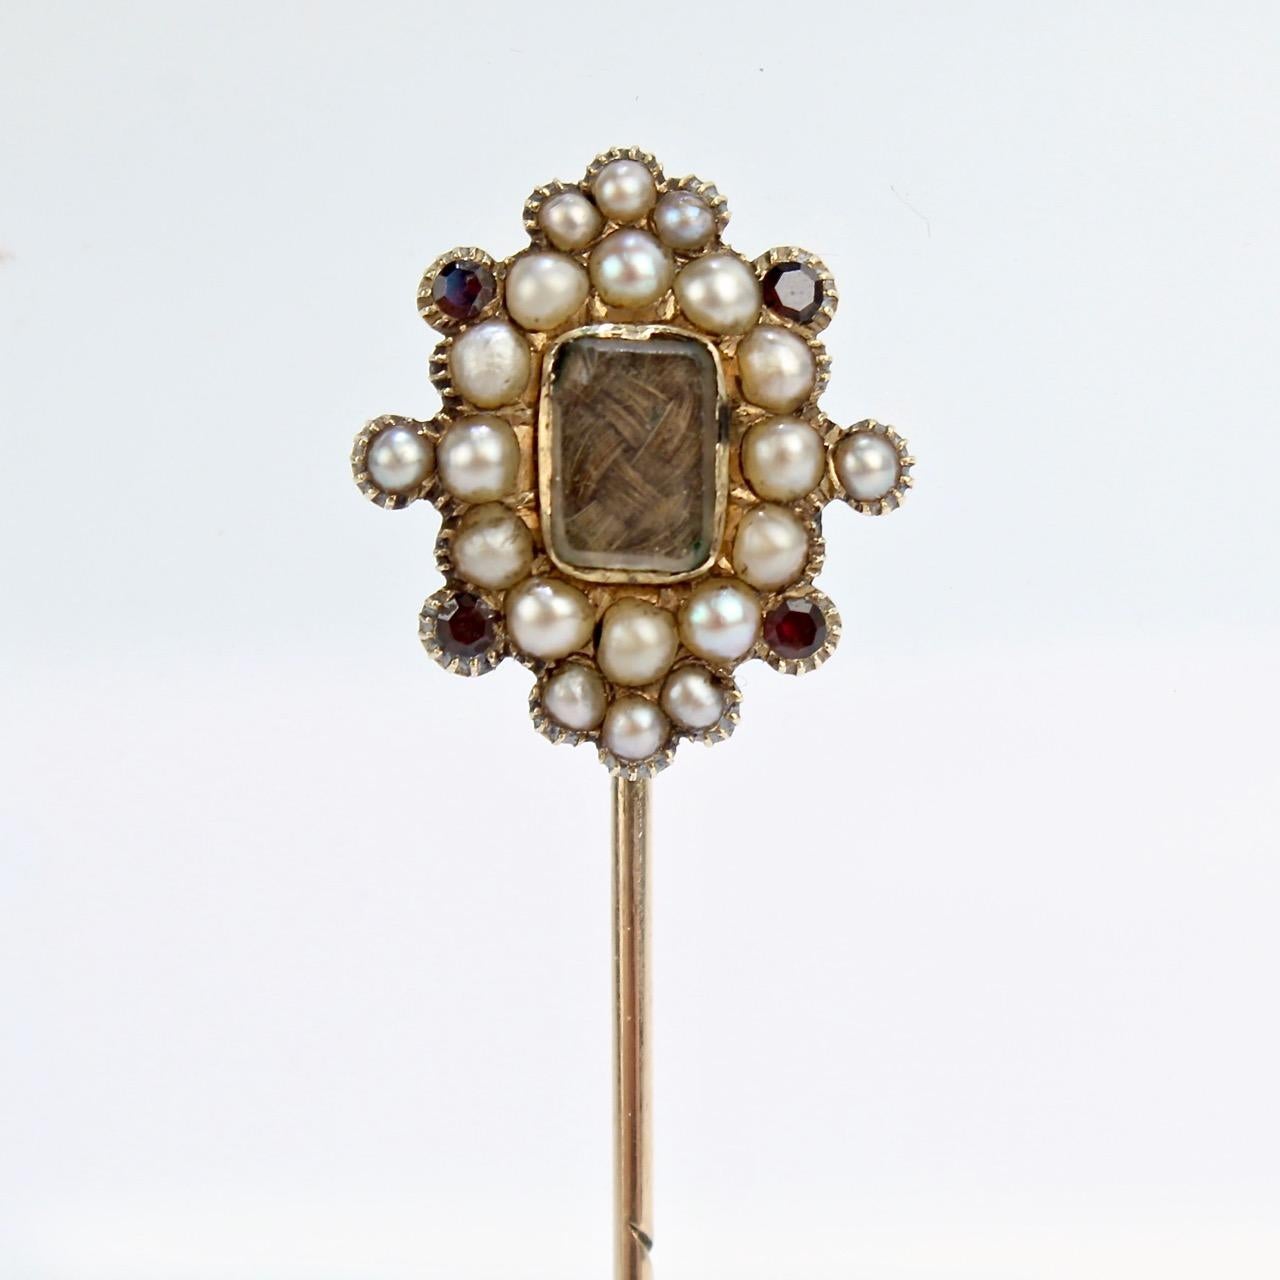 A fine Georgian hair art memorial or mourning stick pin.

With braided hair behind glass in a gold setting and surrounded by seed pearls and garnets. 

In the Georgian and Victorian eras, woven hair art was used to memorialize a departed loved one